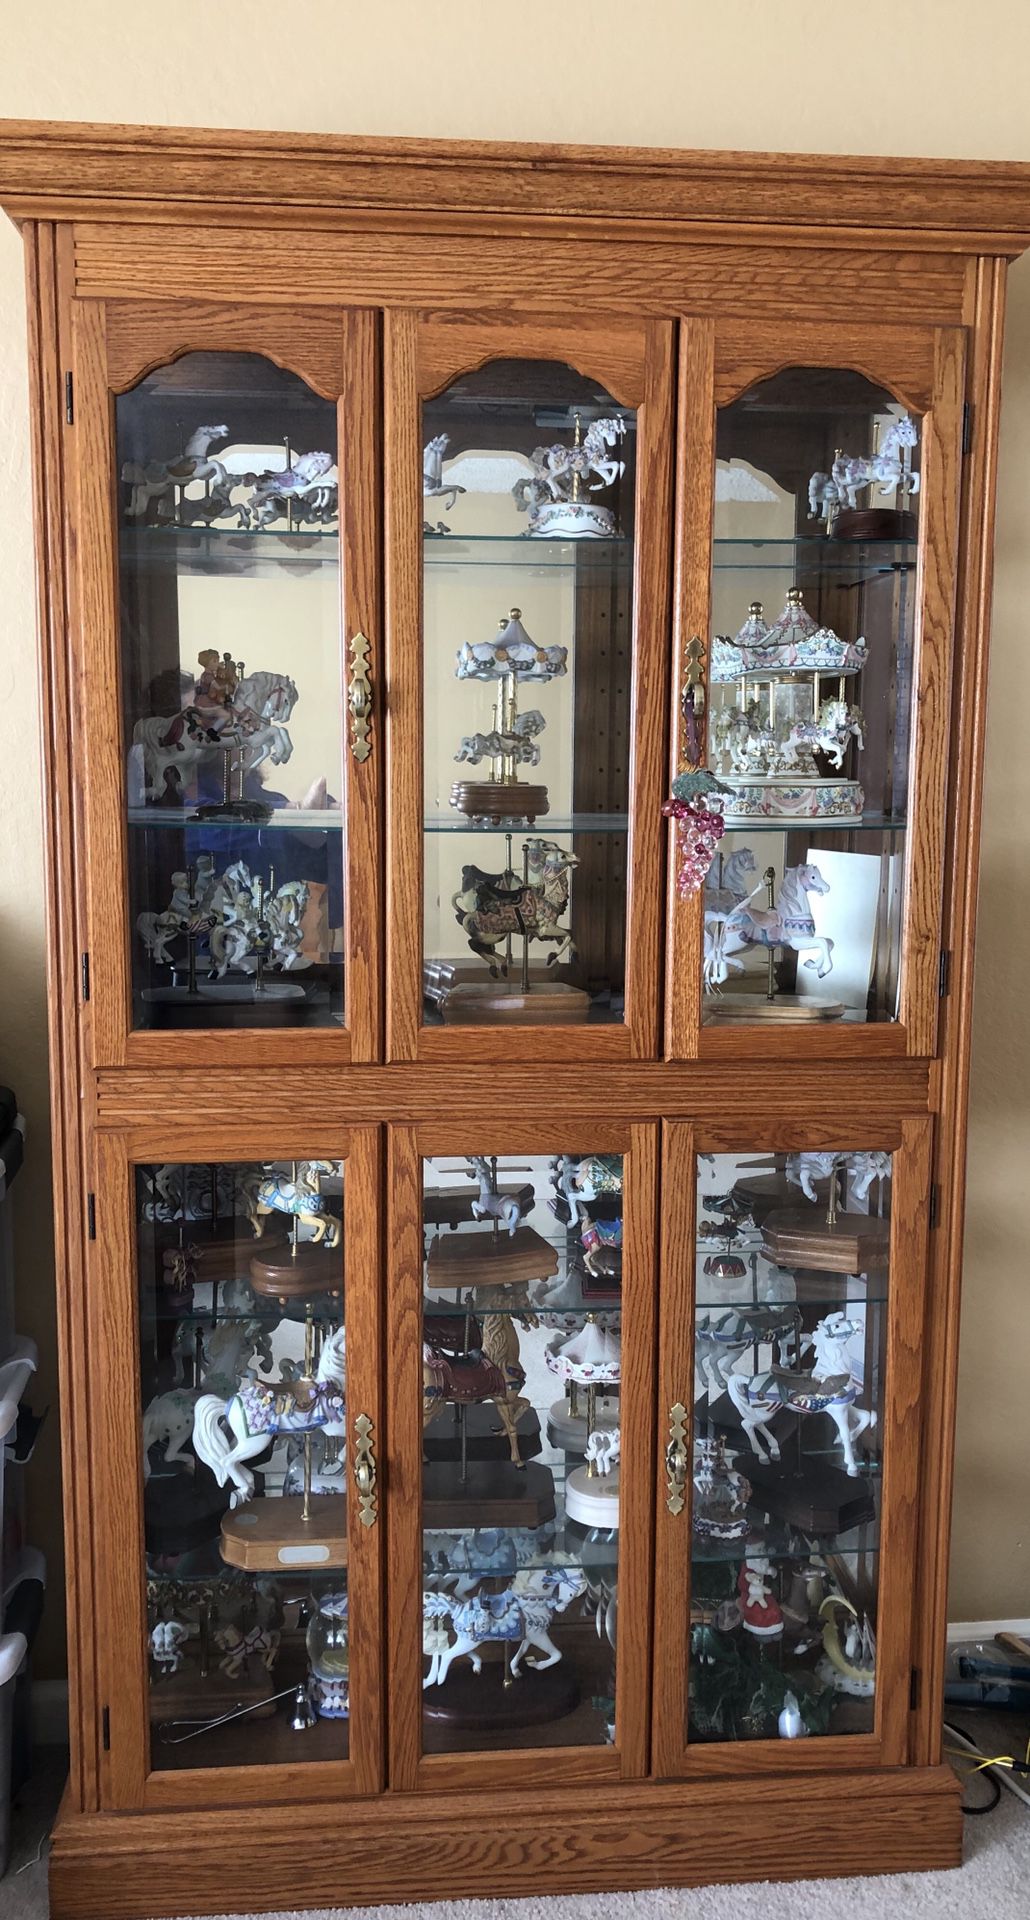 Cabinet and 15-20 Carousel Figurines / Music Boxes